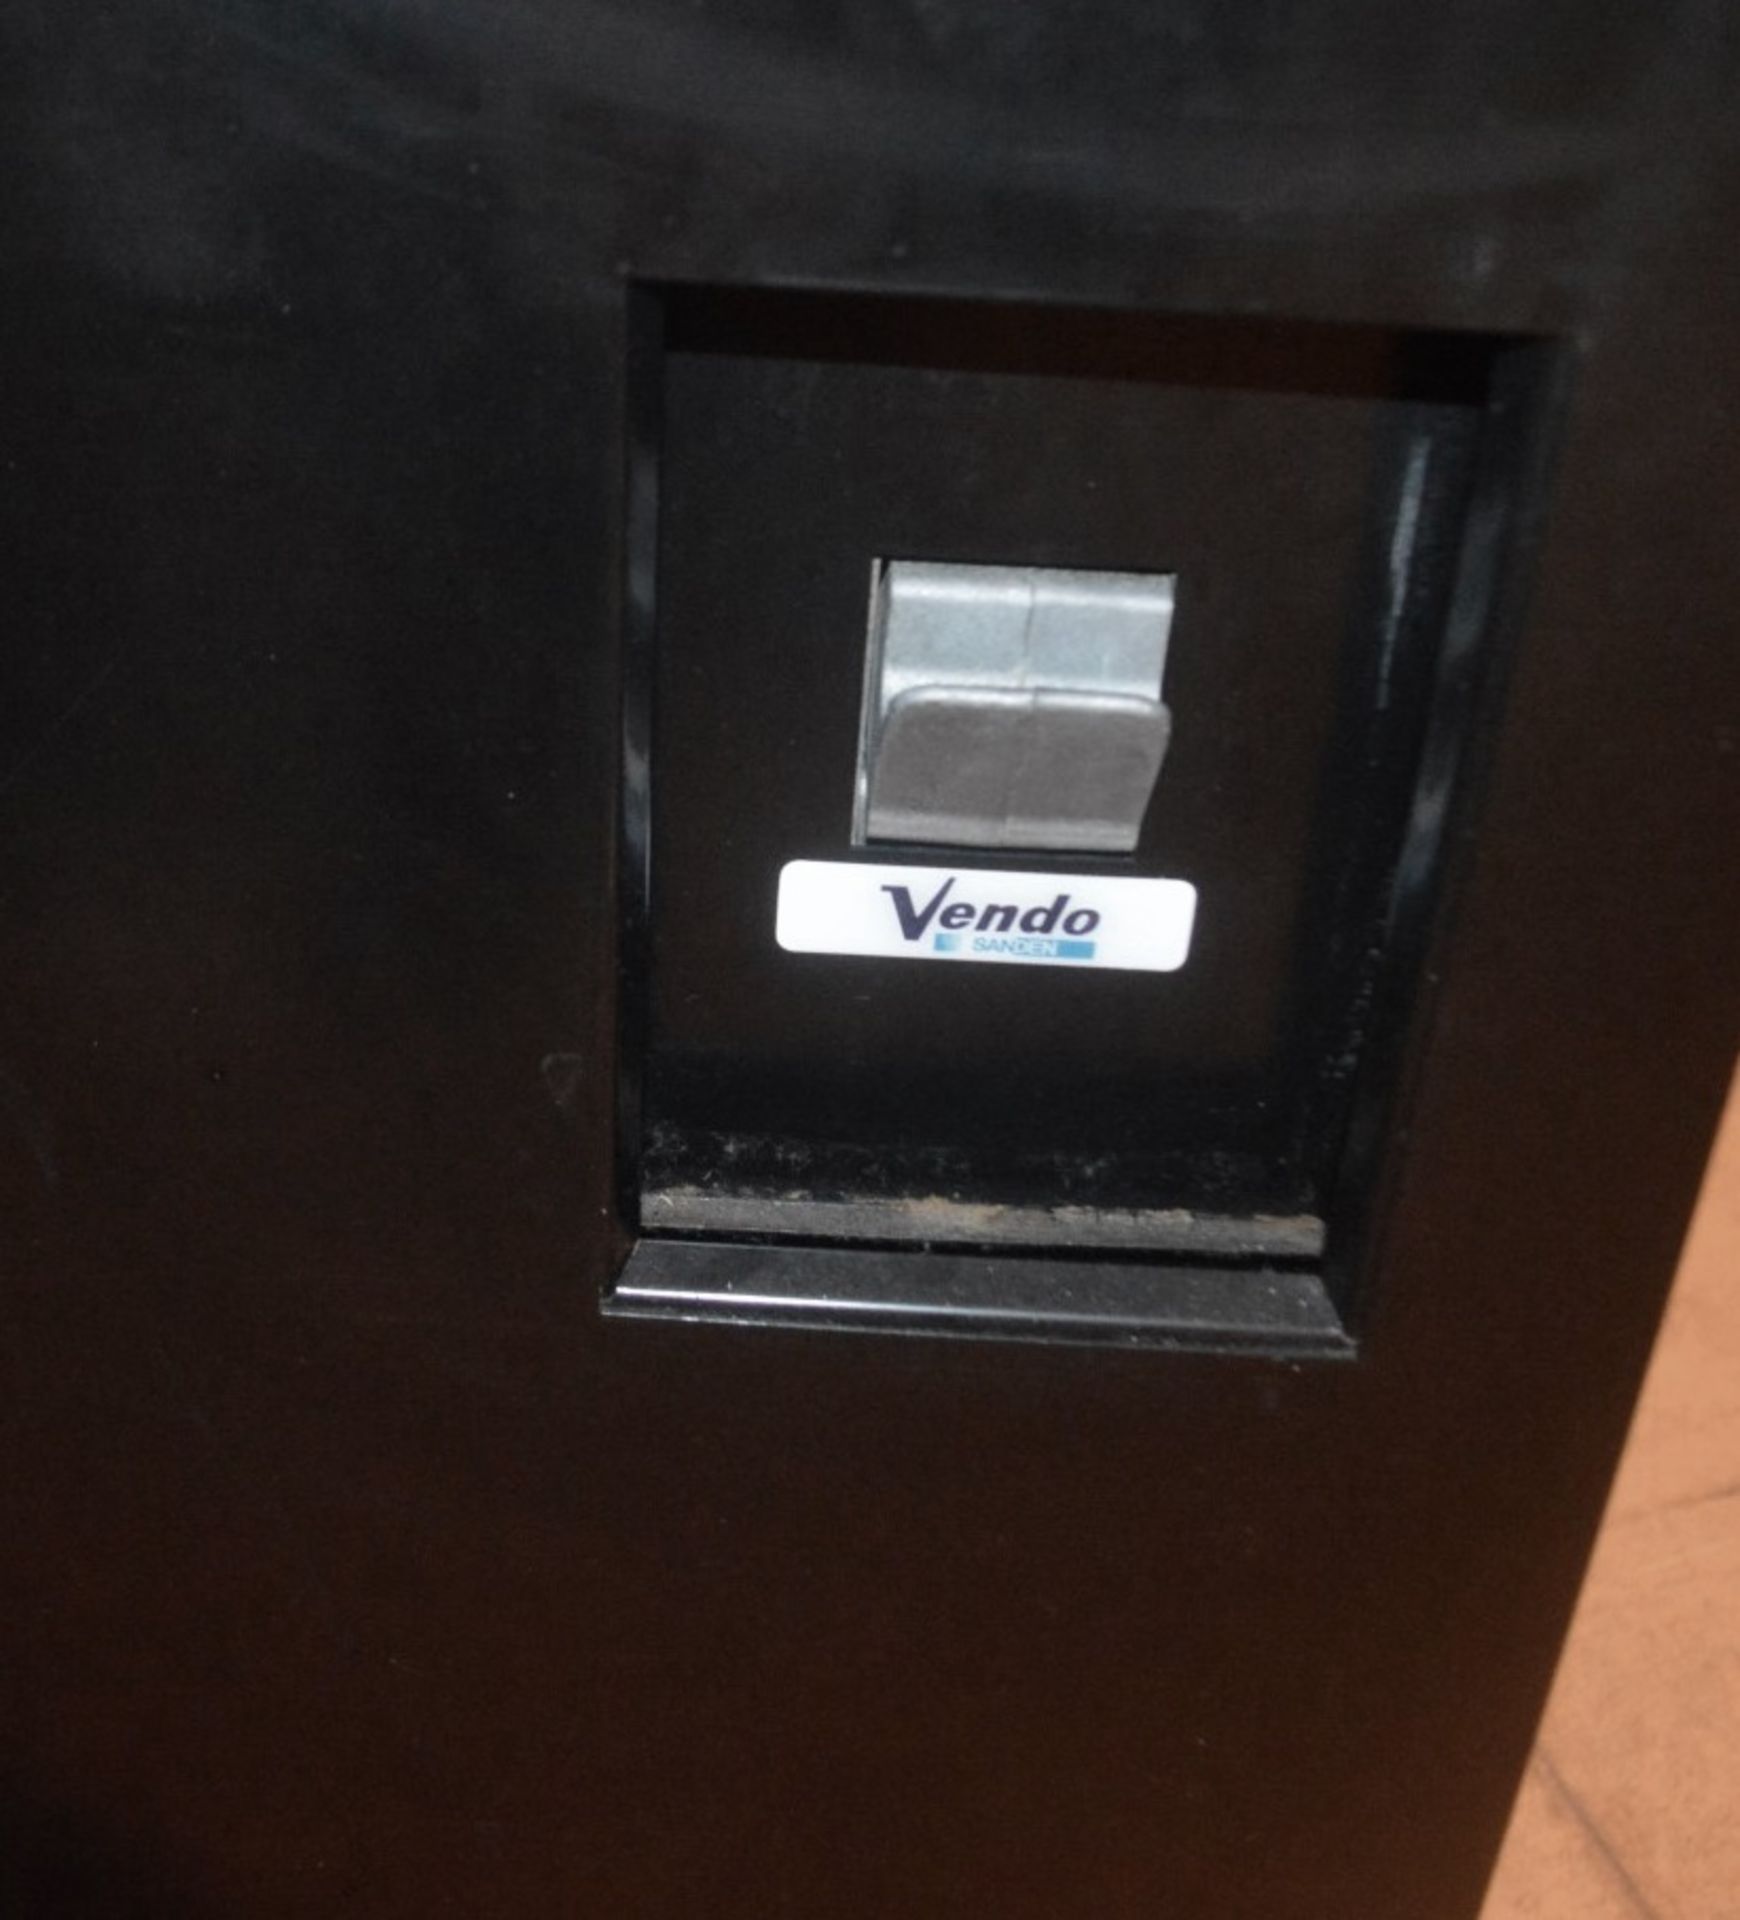 1 x VENDO Vending Machine (SVE G5F) - Dimensions: H184 x W96 x D86cm - Very Recently Removed From - Image 17 of 18